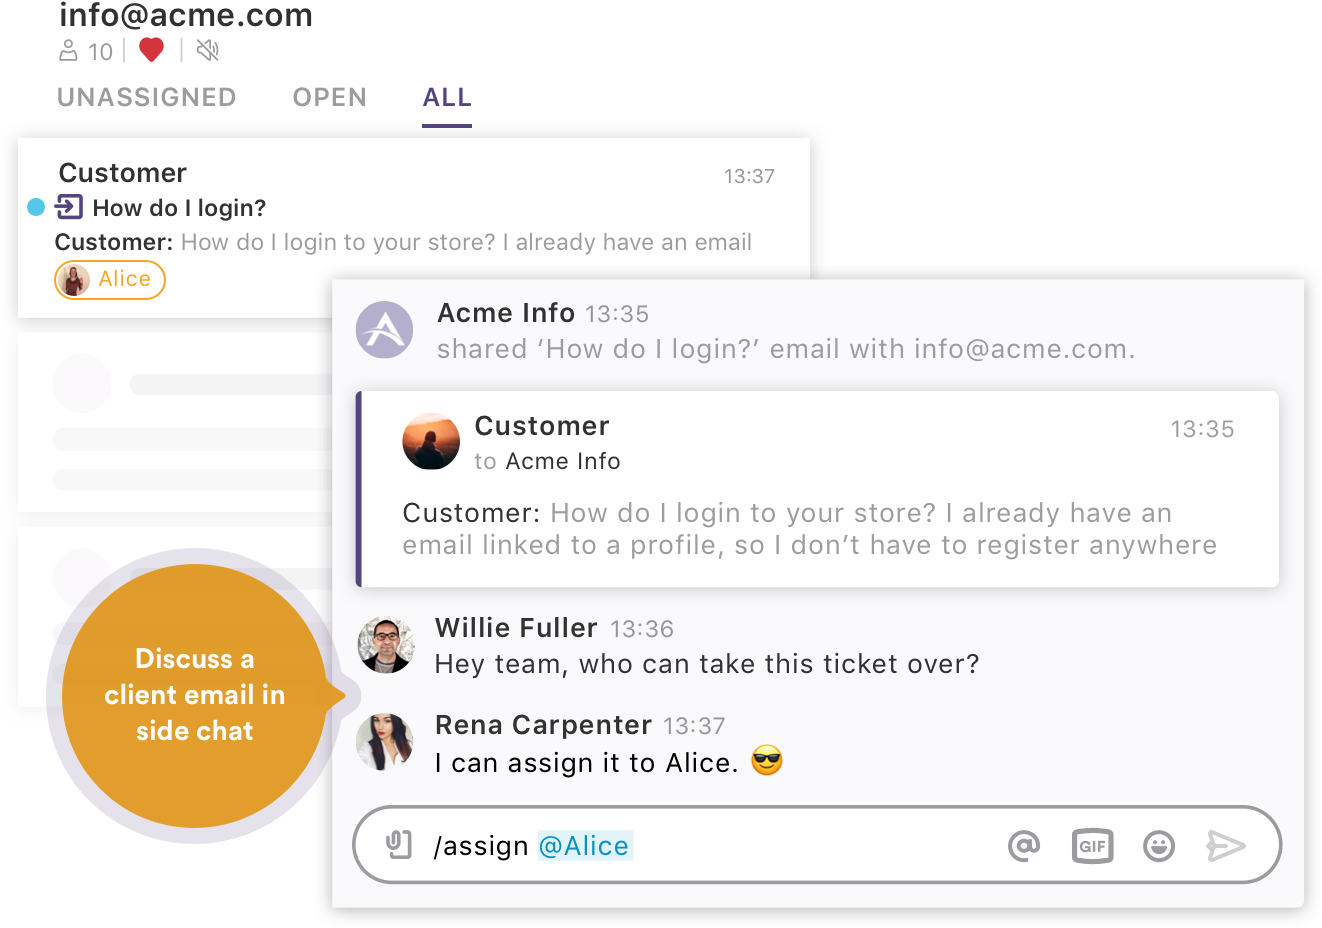 Discuss an email in side chat in shared inbox